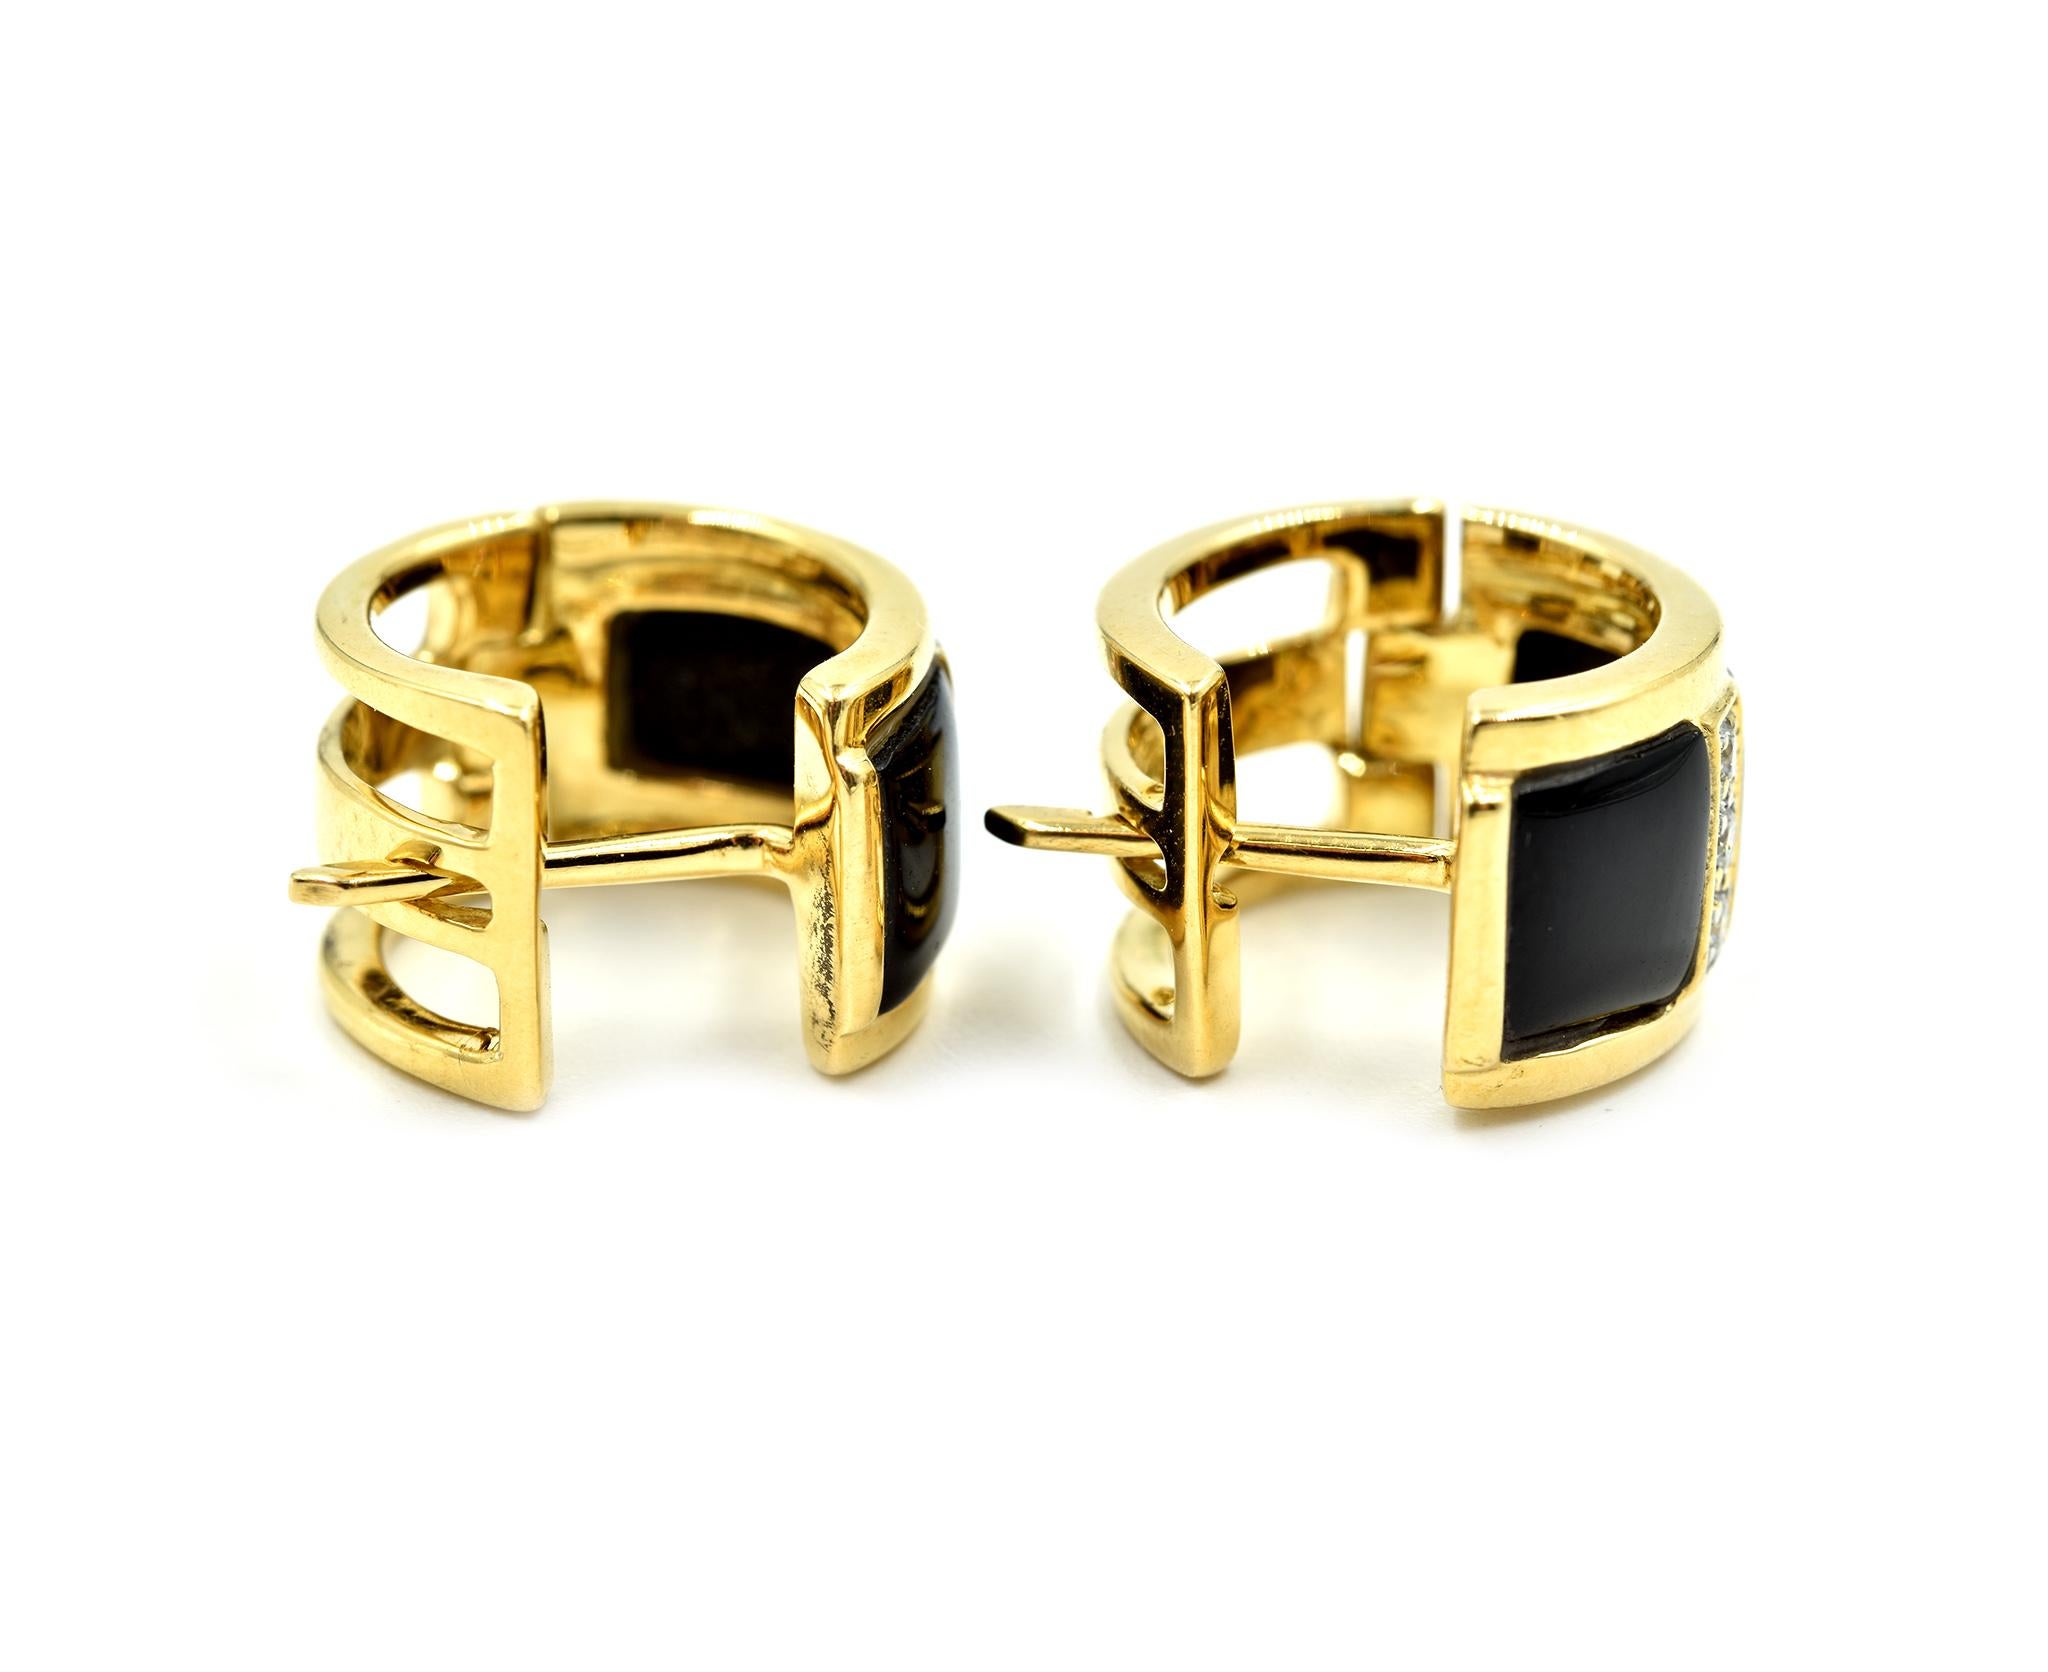 Designer: custom design
Material: 18k yellow gold and black onyx
Diamonds: six round brilliant cuts = 0.09 carat total weight
Dimensions: each earring measures 1/2 inches long and 3/8 inches wide 
Fastenings: snap closure fastenings
Weight: 8.70